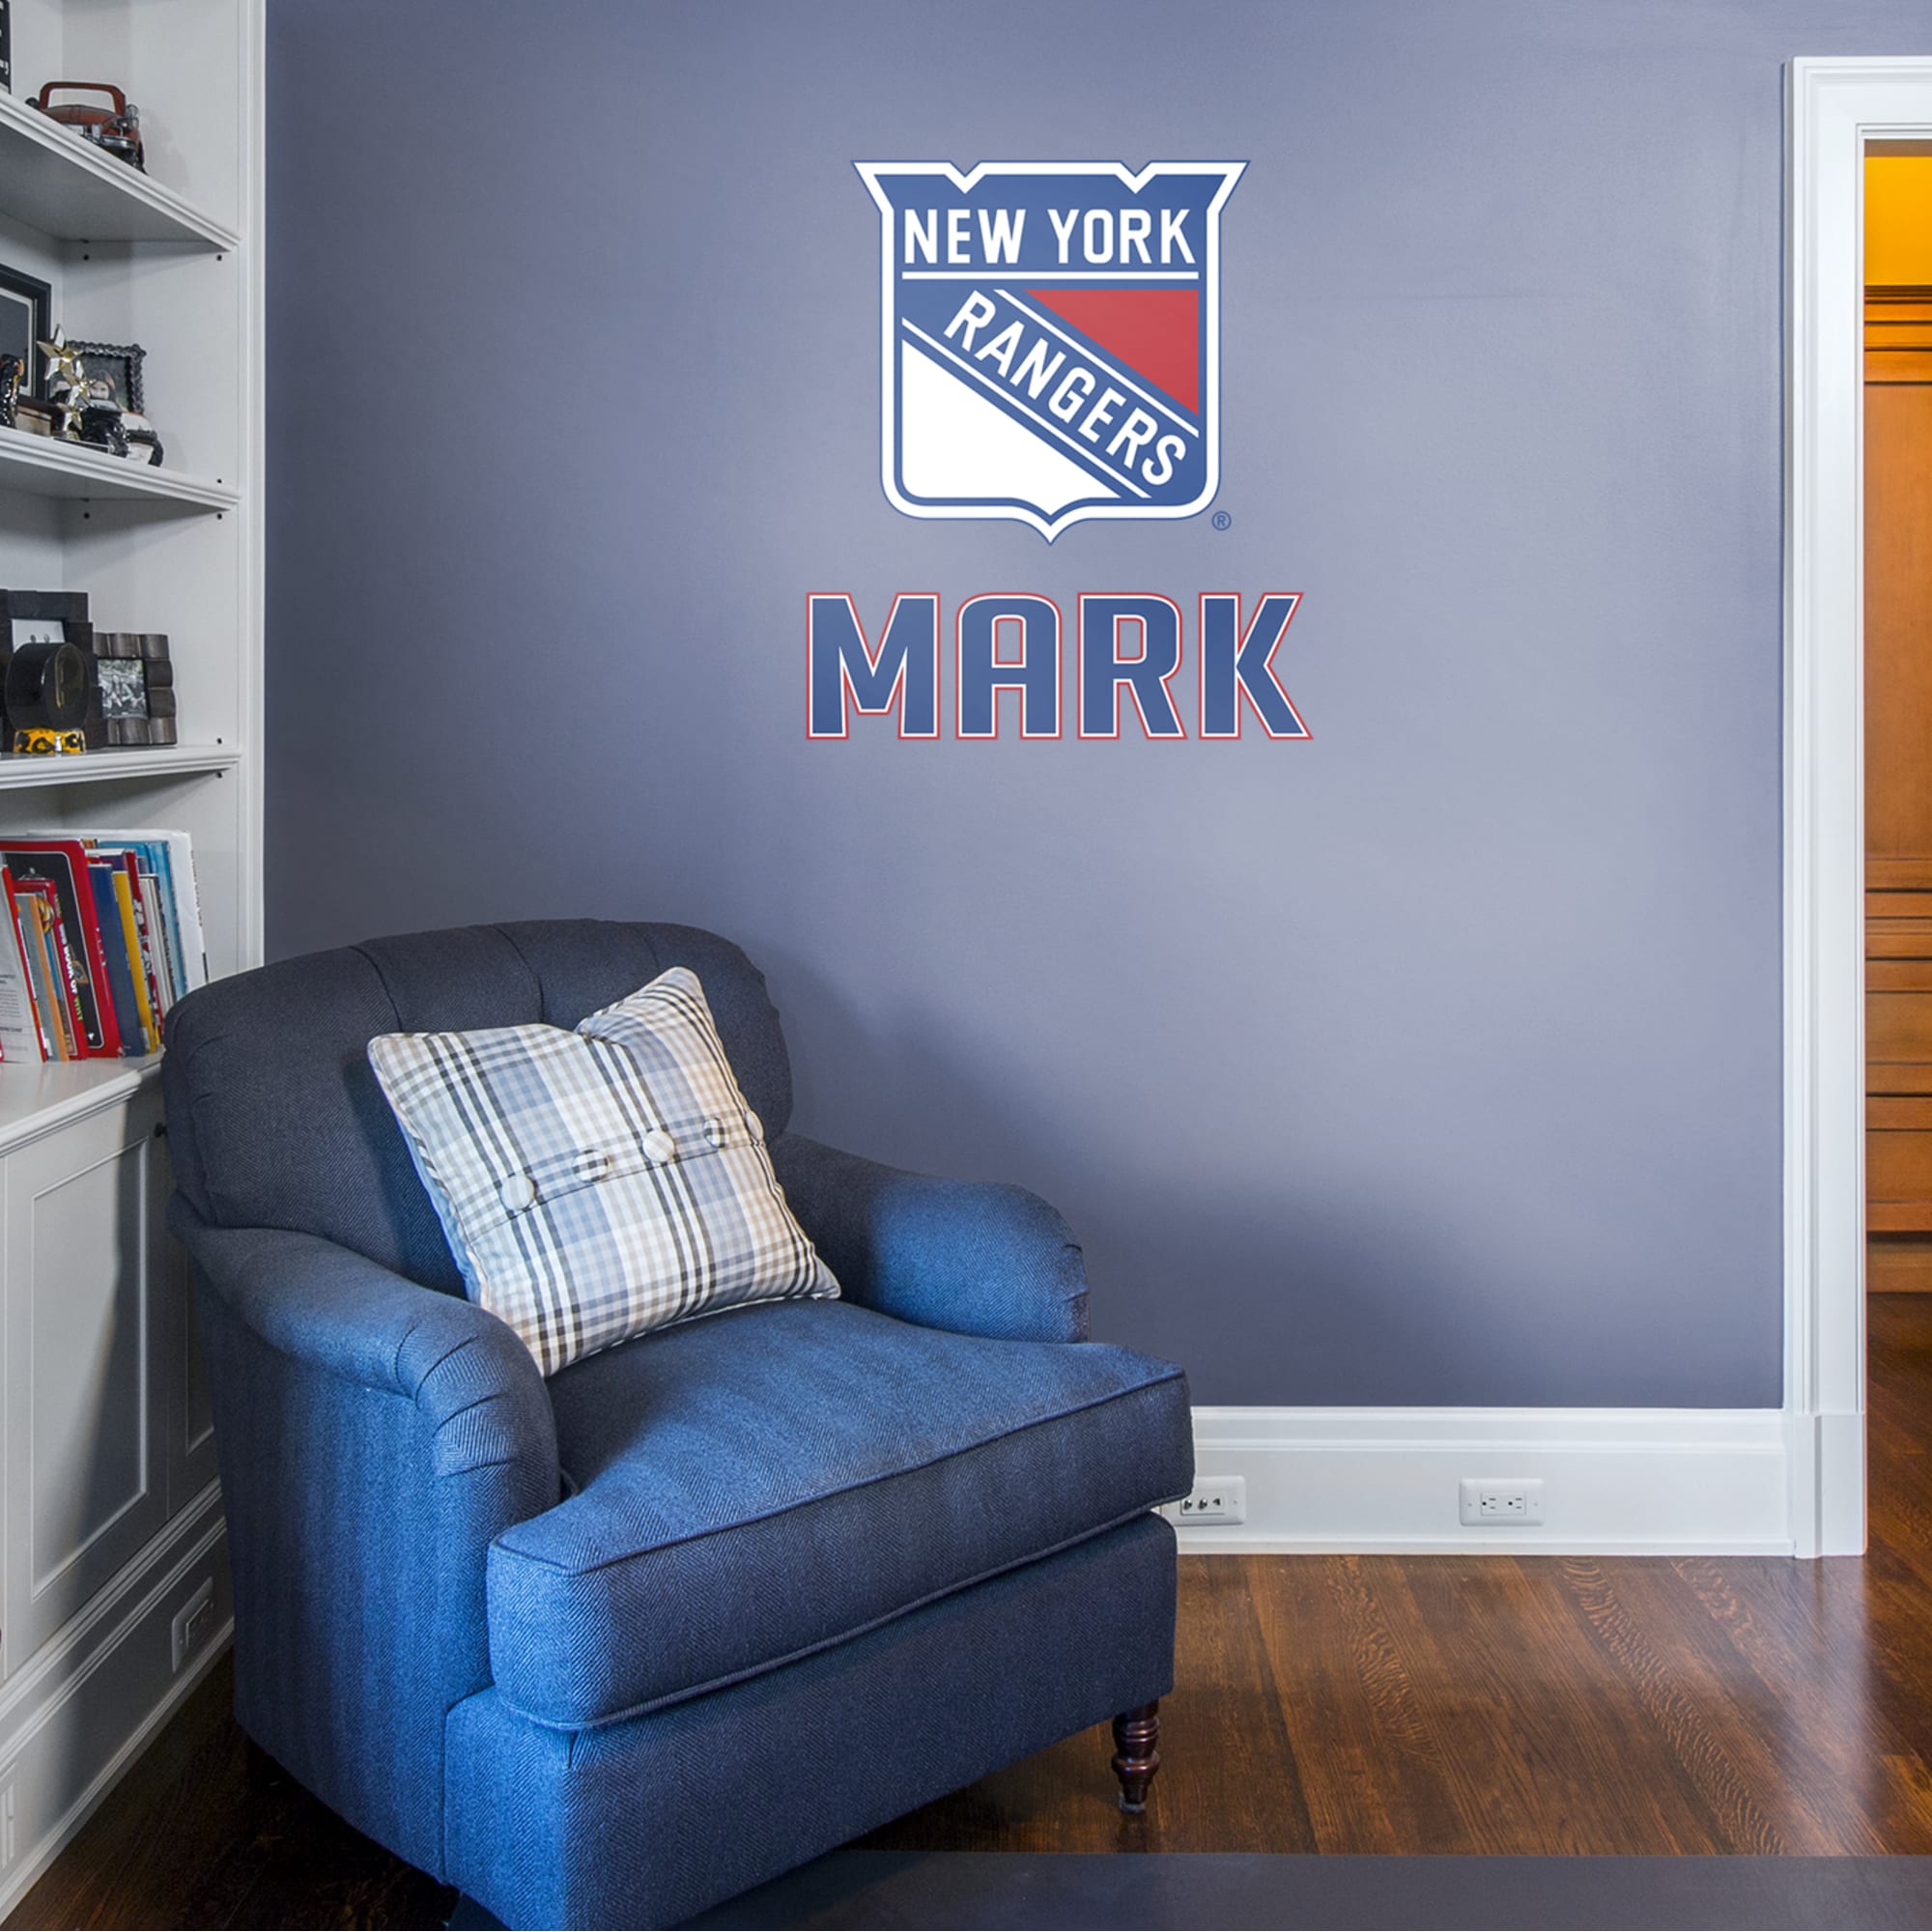 New York Rangers: Stacked Personalized Name - Officially Licensed NHL Transfer Decal in Blue (39.5"W x 52"H) by Fathead | Vinyl